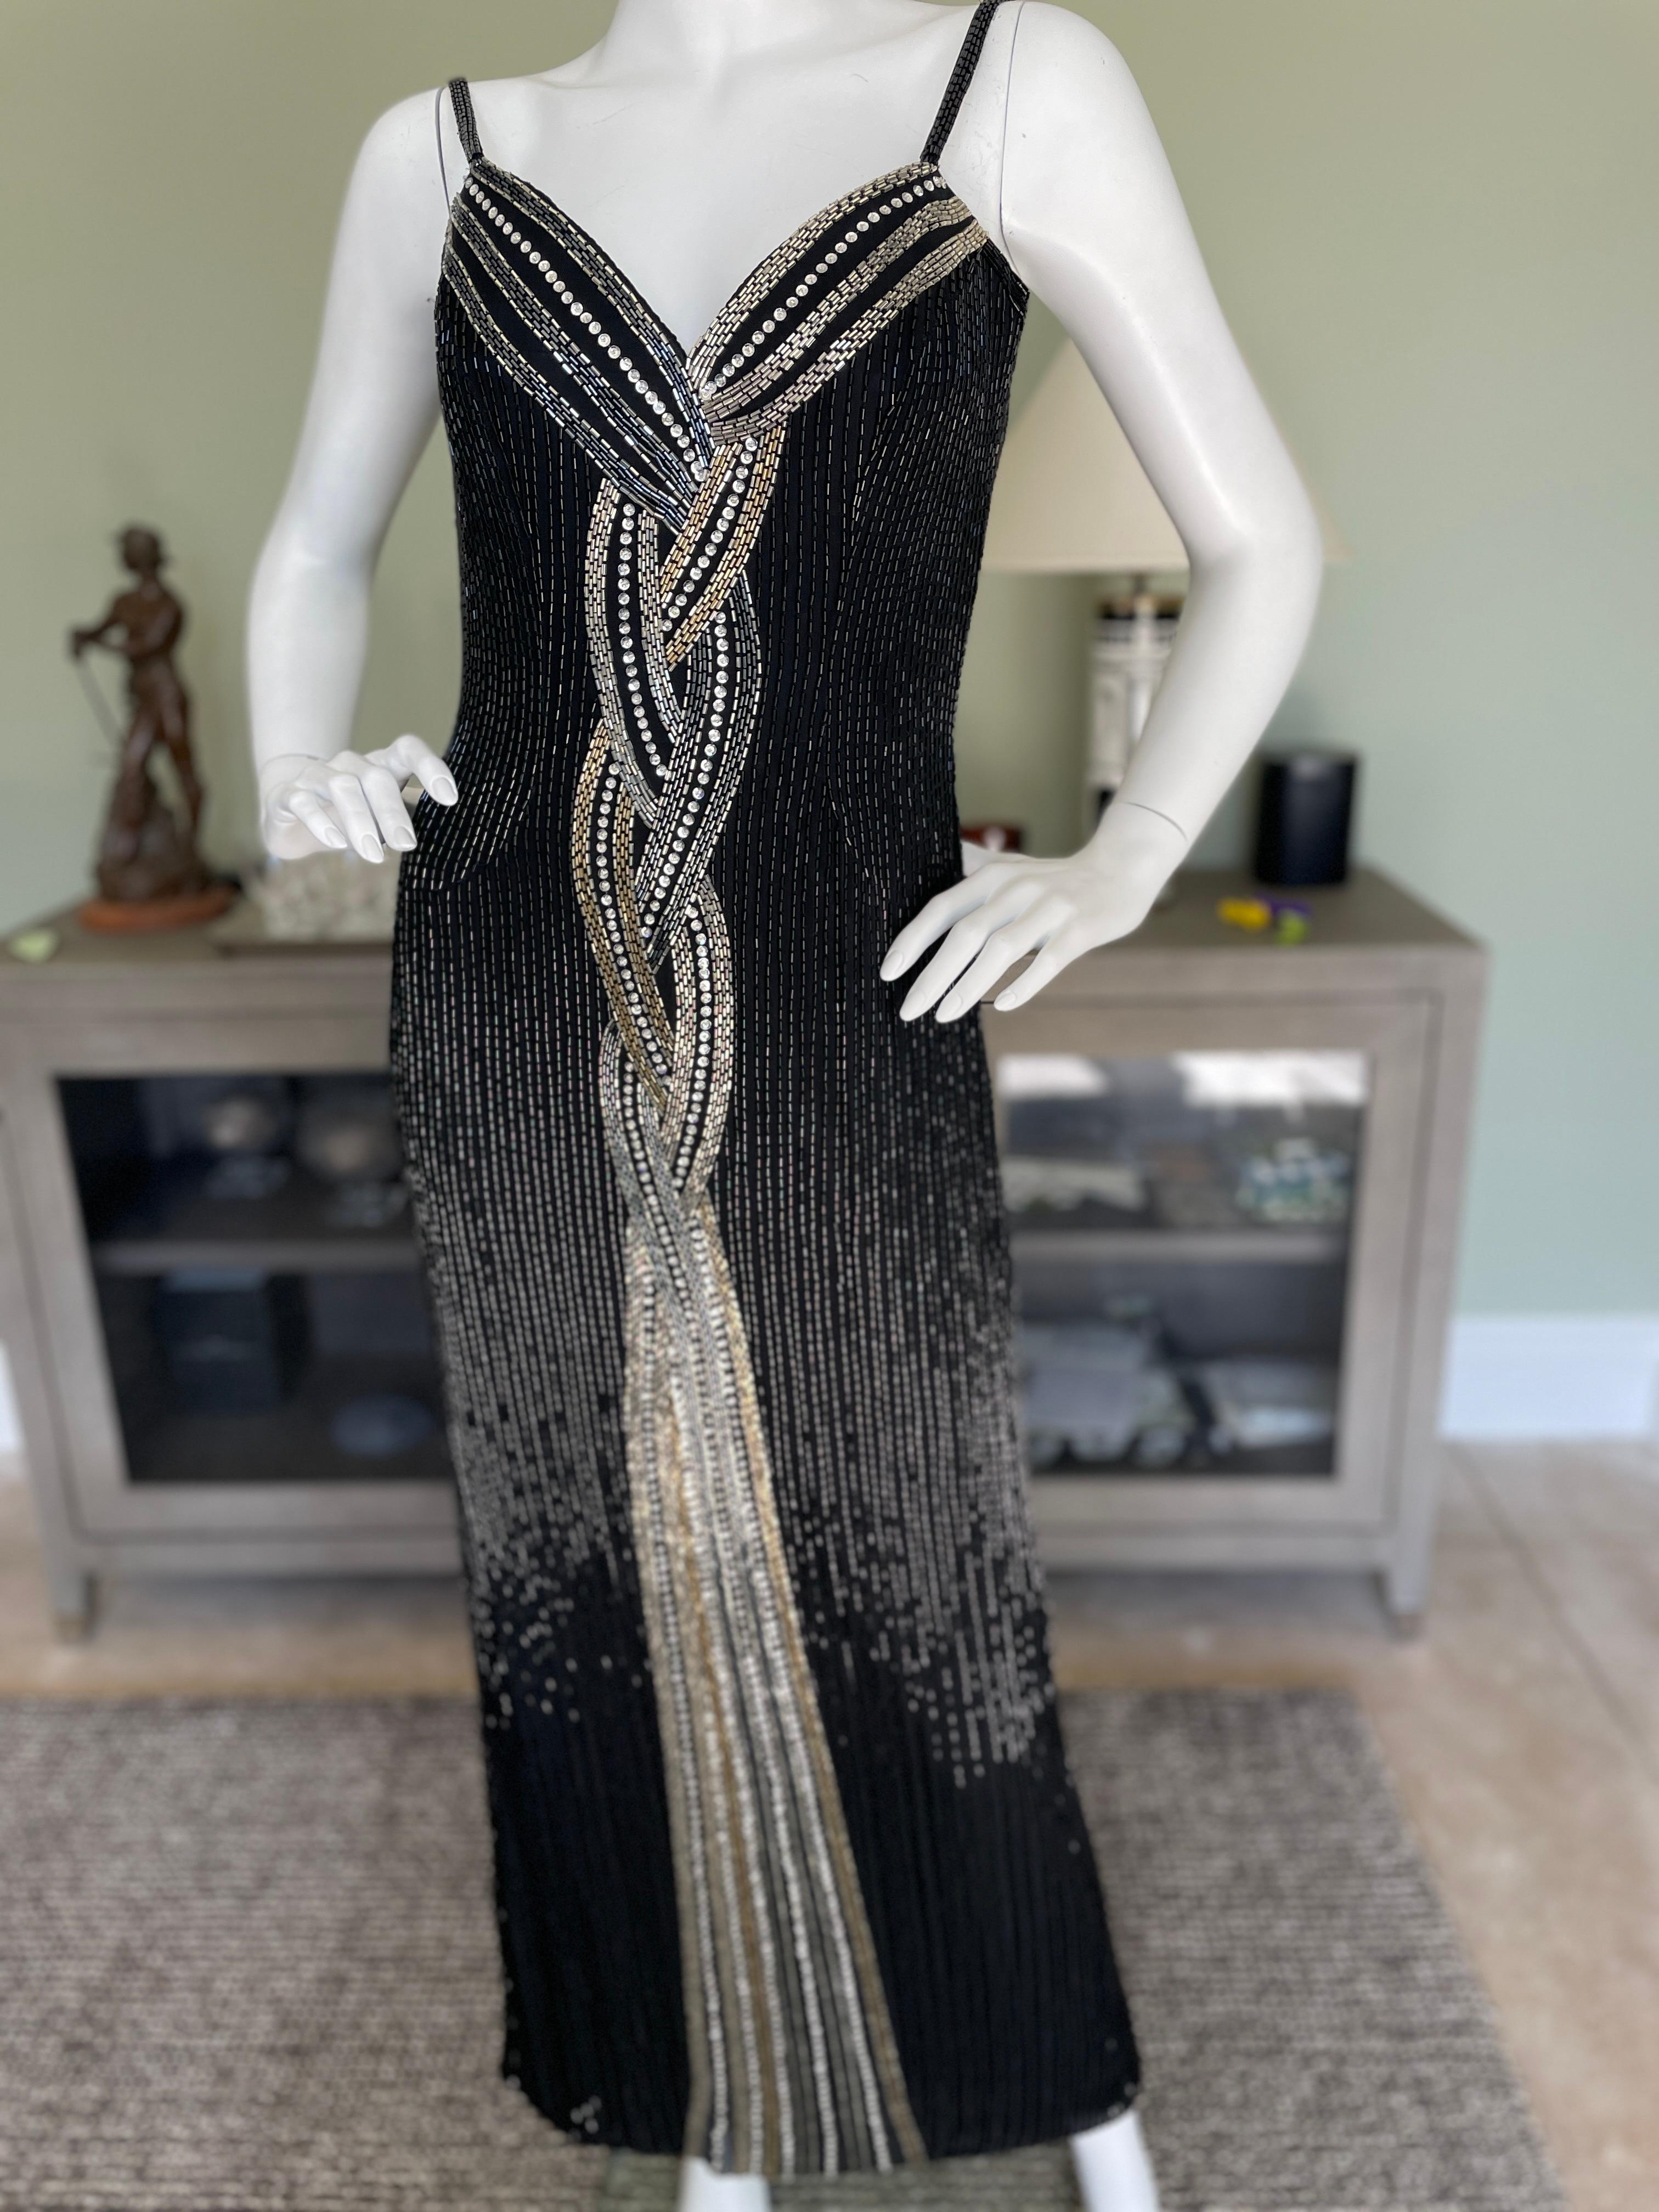 Bob Mackie Black Bugle Beaded Waterfall Evening Dress
Entirely embellished with black bugle beads, please use the zoom feature to see details.
Size 4-6 (there is no size tag)
Bust 34